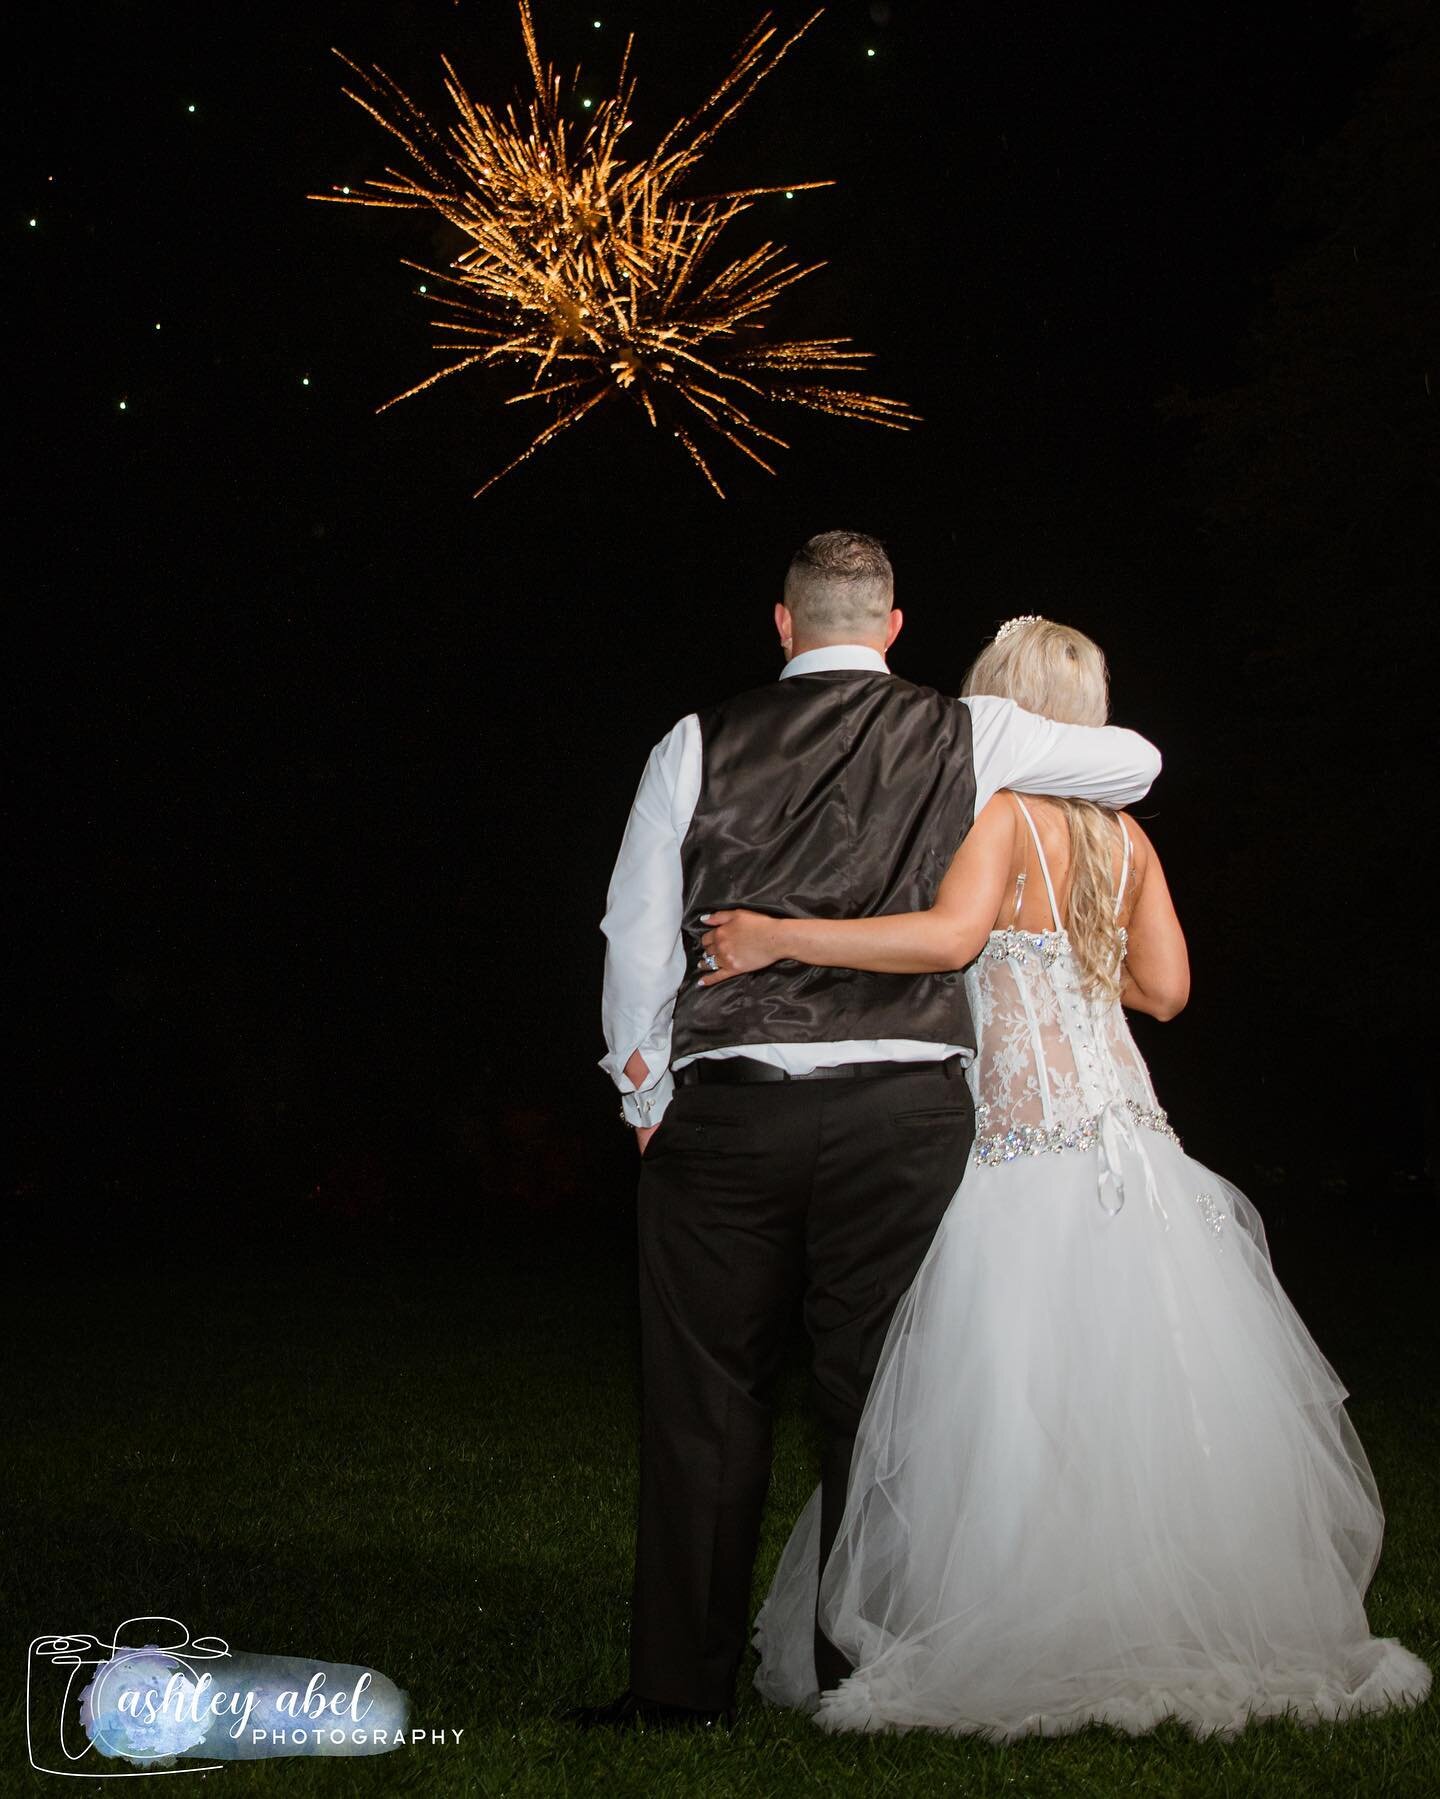 I don&rsquo;t second shoot often but when I do it&rsquo;s for @photographyct  This groom surprised his wife at the end of the night w/ a full firework display &amp; she had no idea!! It was amazing &amp; some great pics came out of it also 😉 🎇 🎆 
